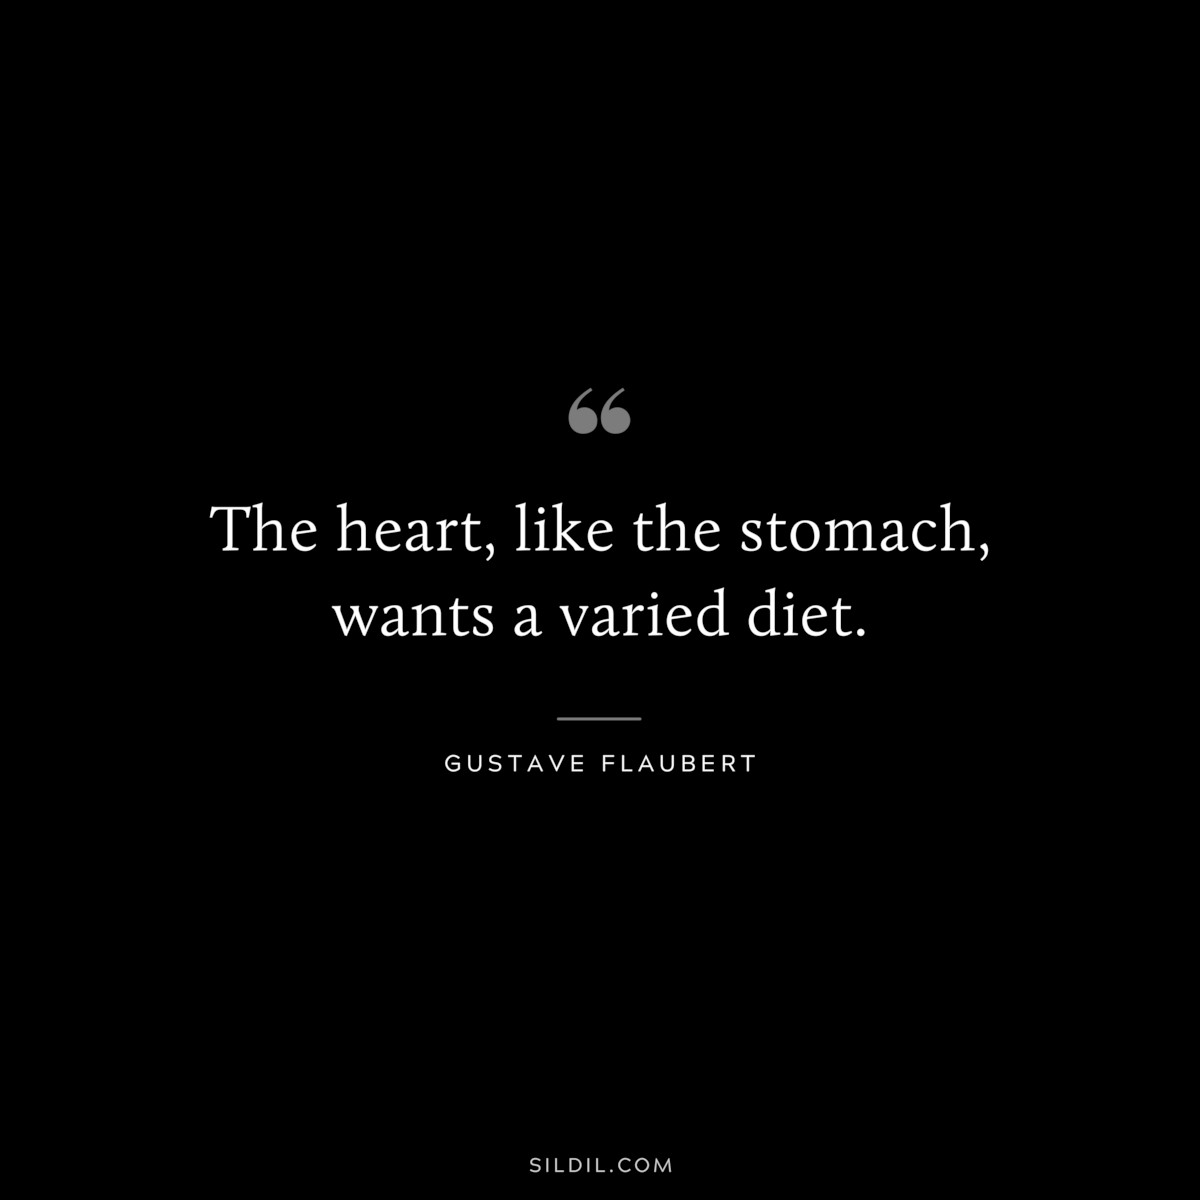 The heart, like the stomach, wants a varied diet. ― Gustave Flaubert